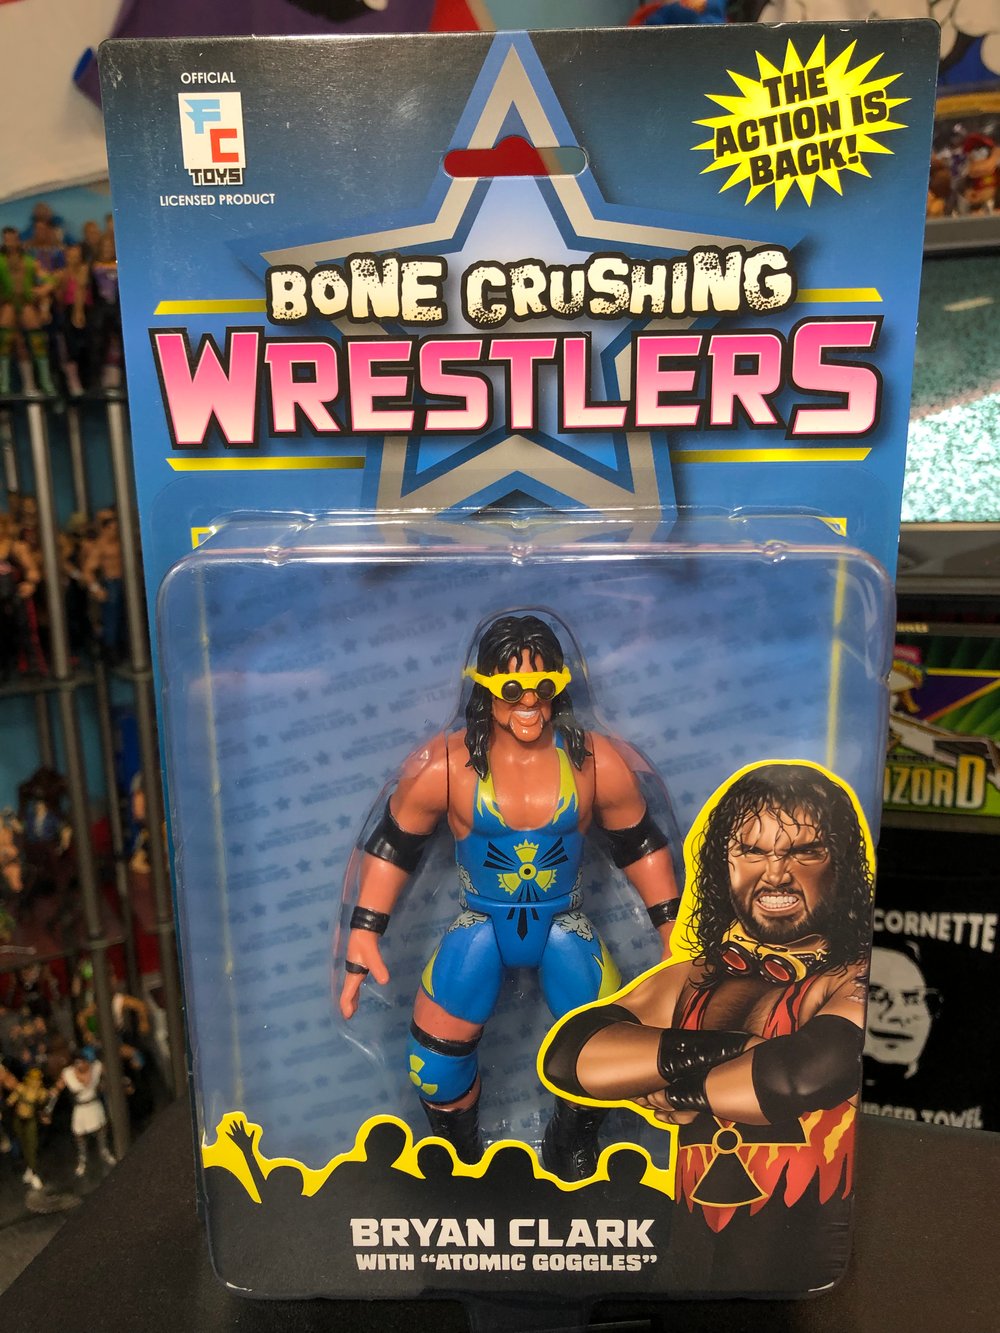 Image of **IN STOCK** VARIANT LIMITED TO 400 BRYAN CLARK Bone Crushing Wrestlers Series 1 Figure by FC Toys